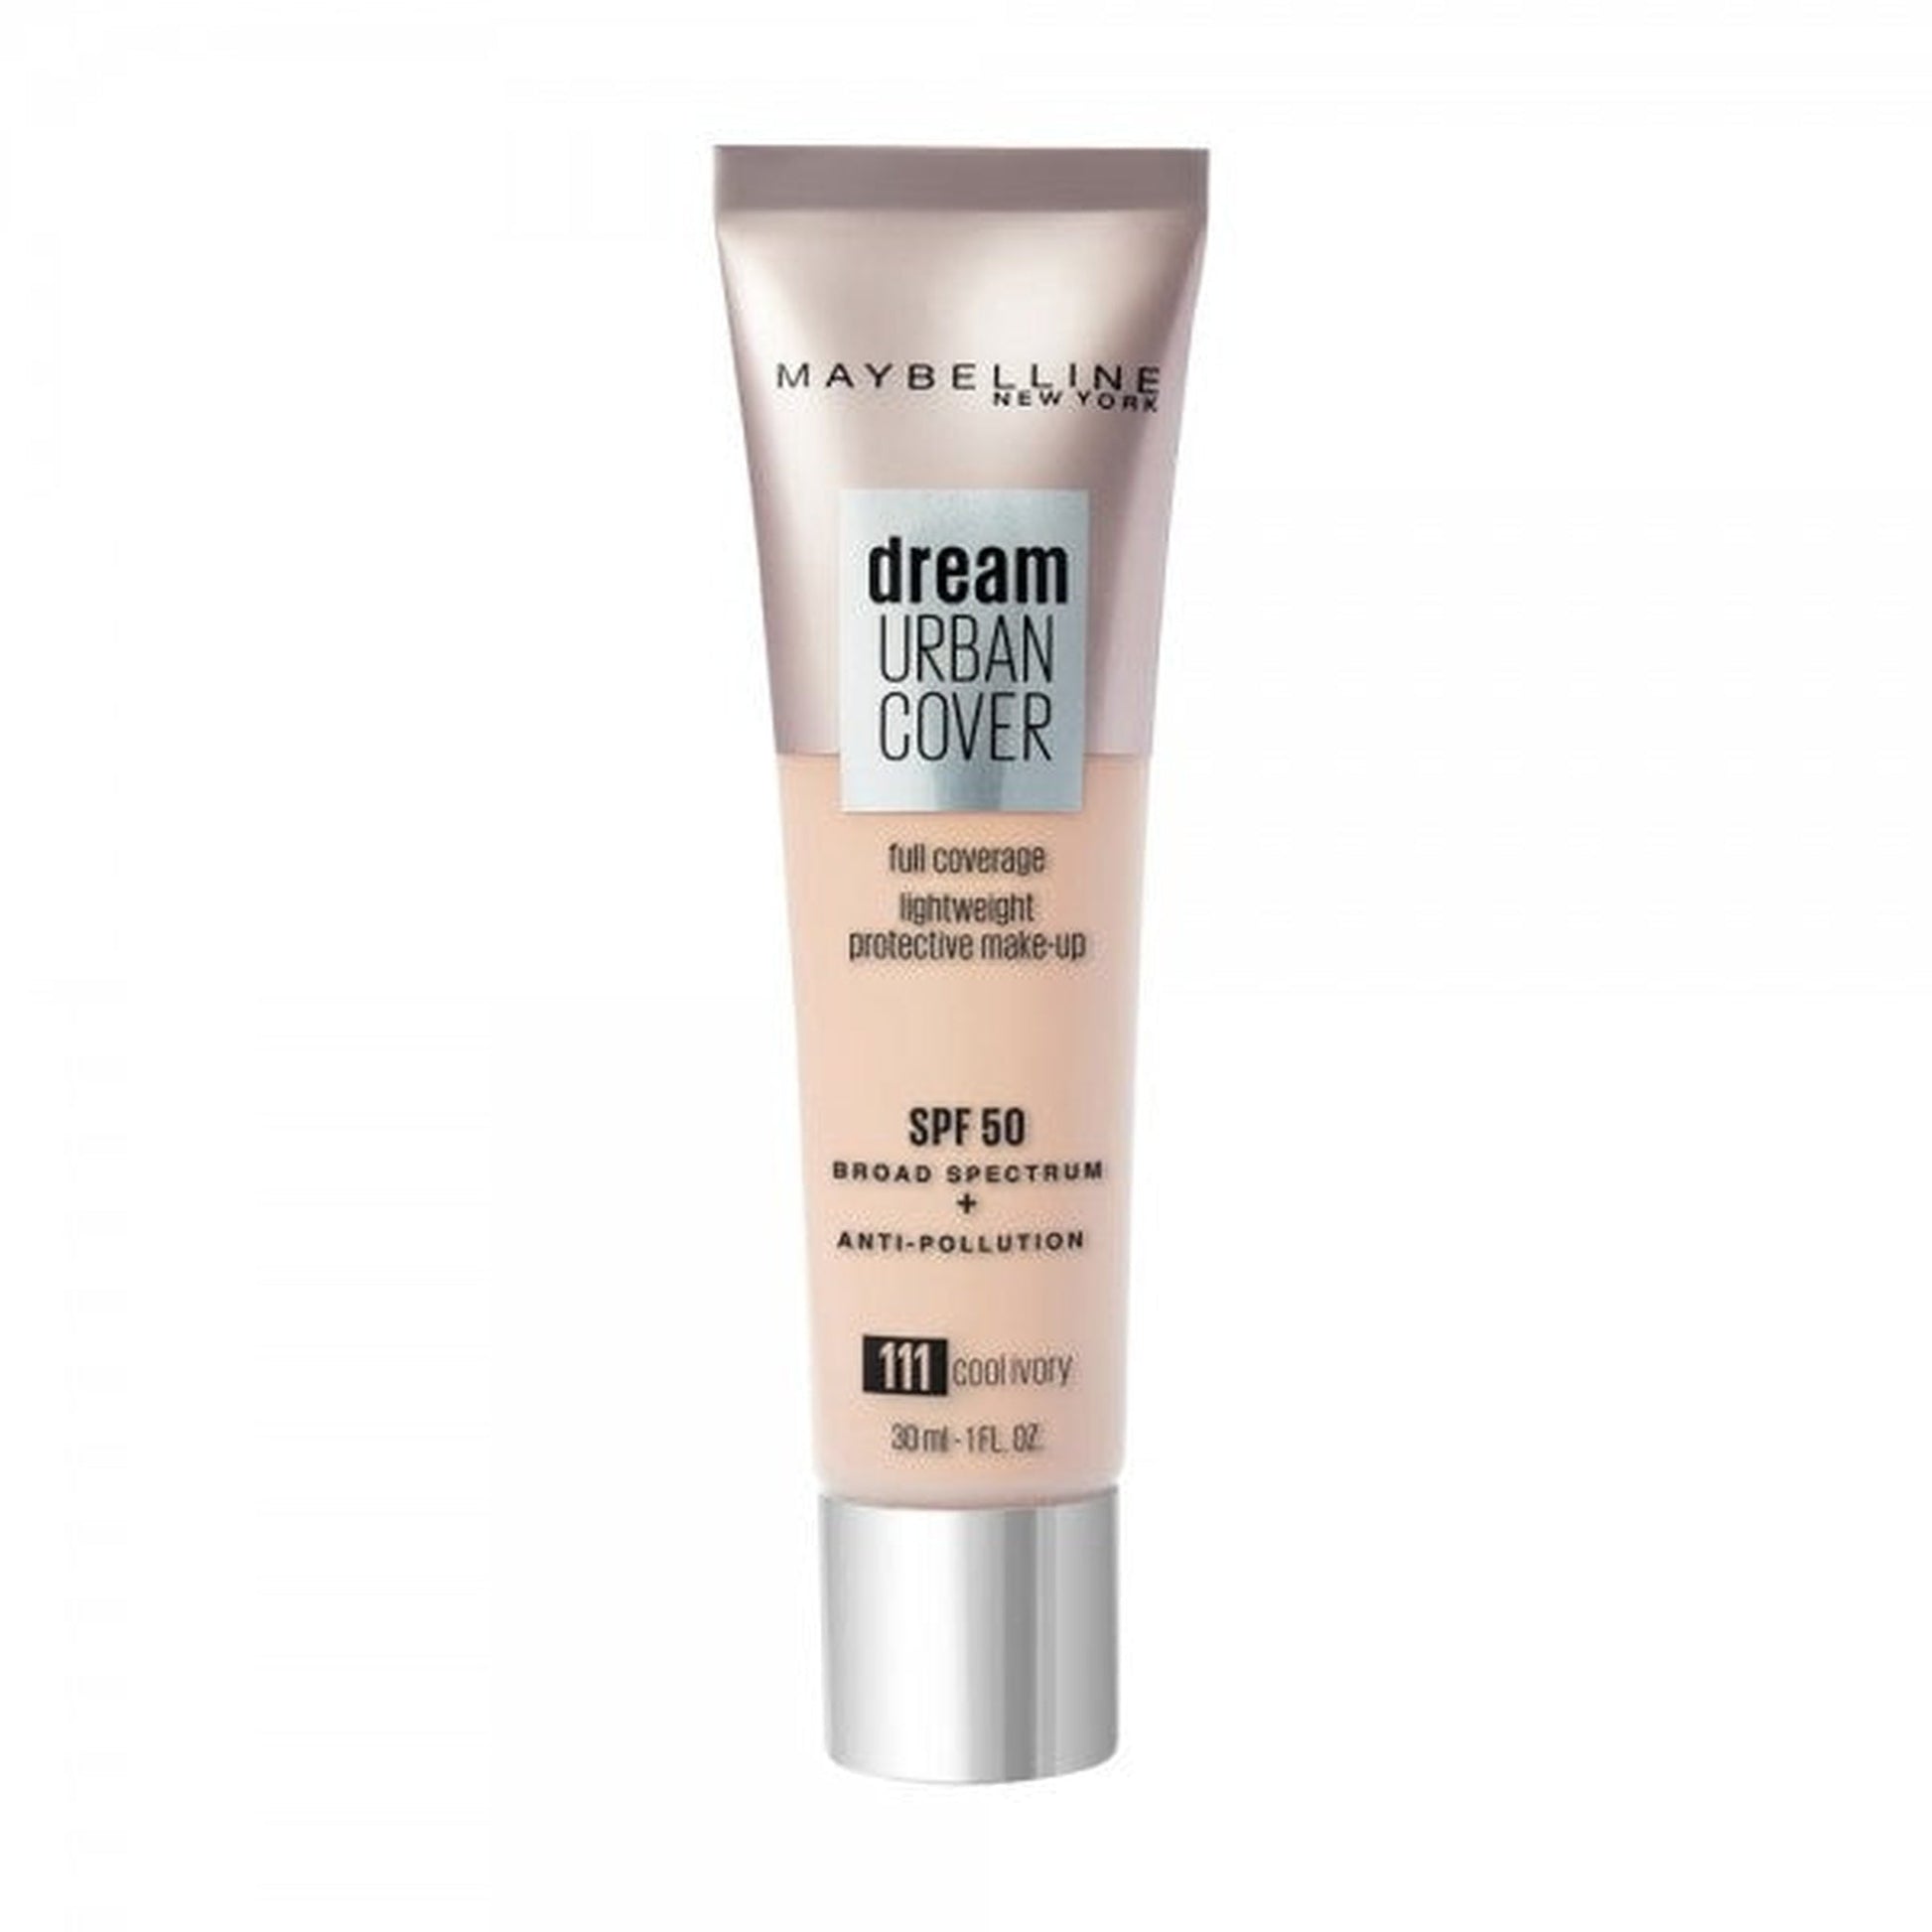 Maybeline Dream Urban Cover Foundation SPF50 - 111 Cool Ivory-Maybelline-BeautyNmakeup.co.uk